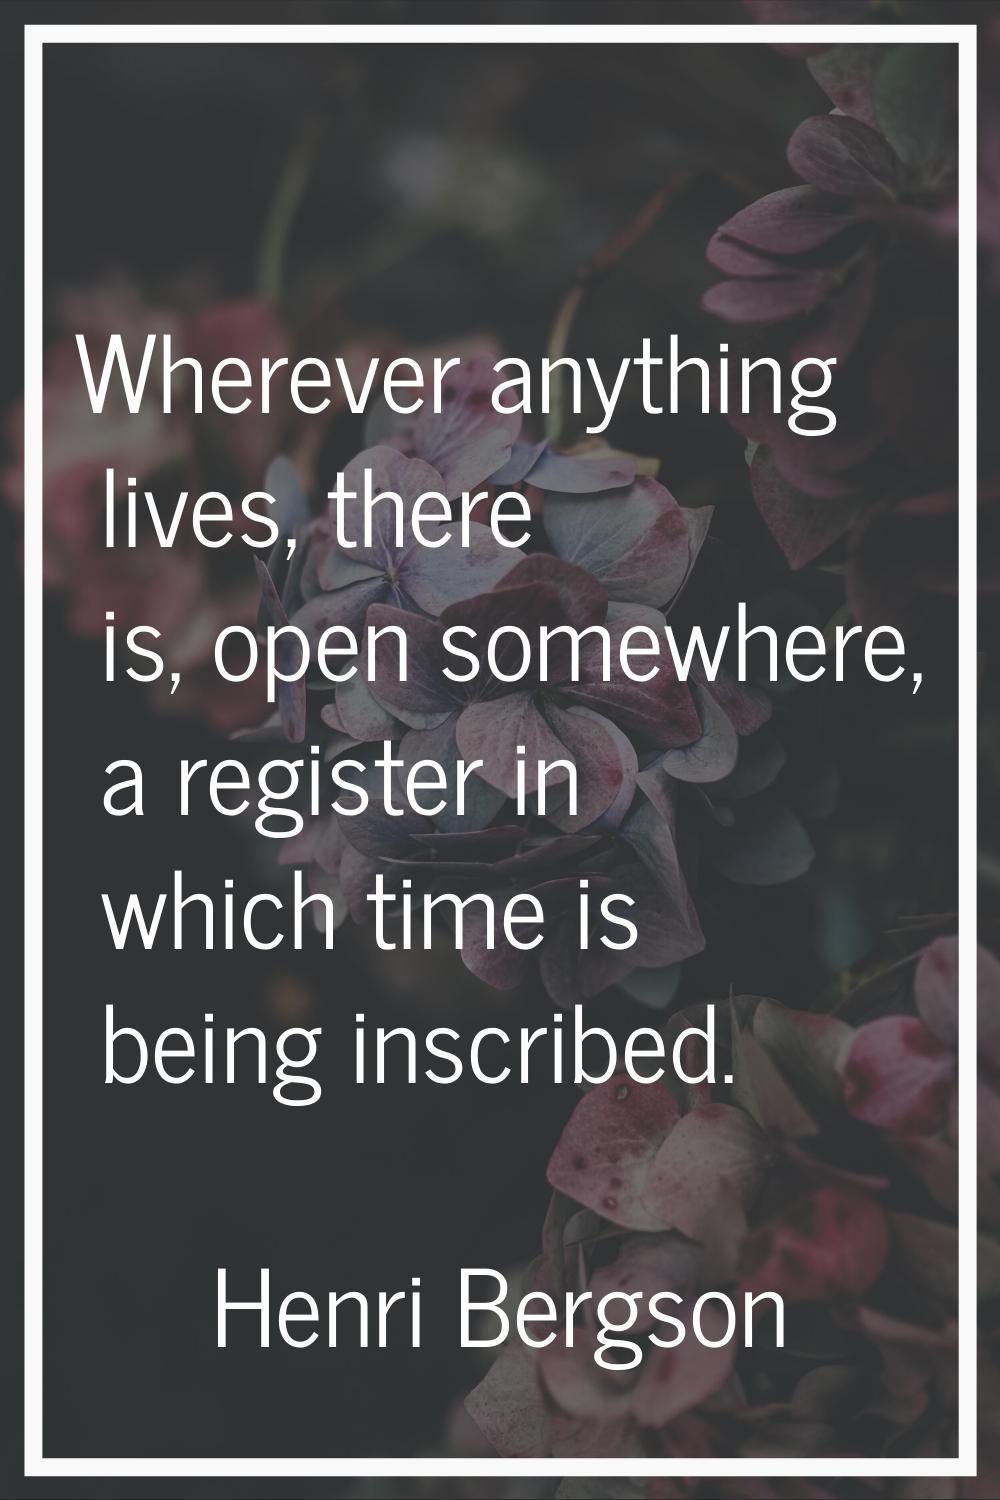 Wherever anything lives, there is, open somewhere, a register in which time is being inscribed.